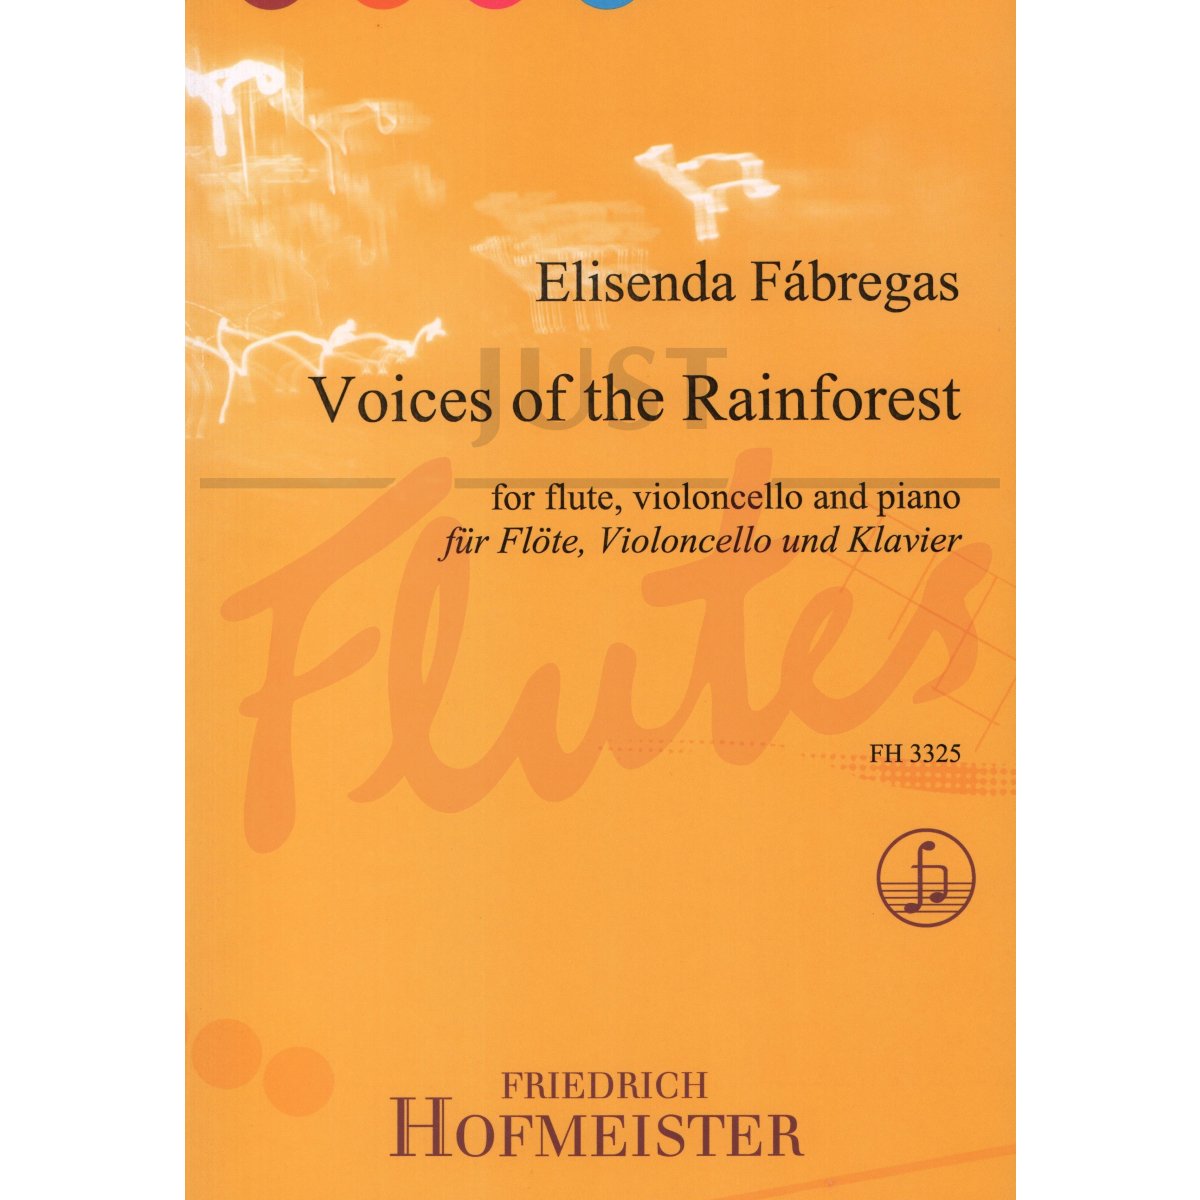 Voices of the Rainforest for Flute, Cello and Piano